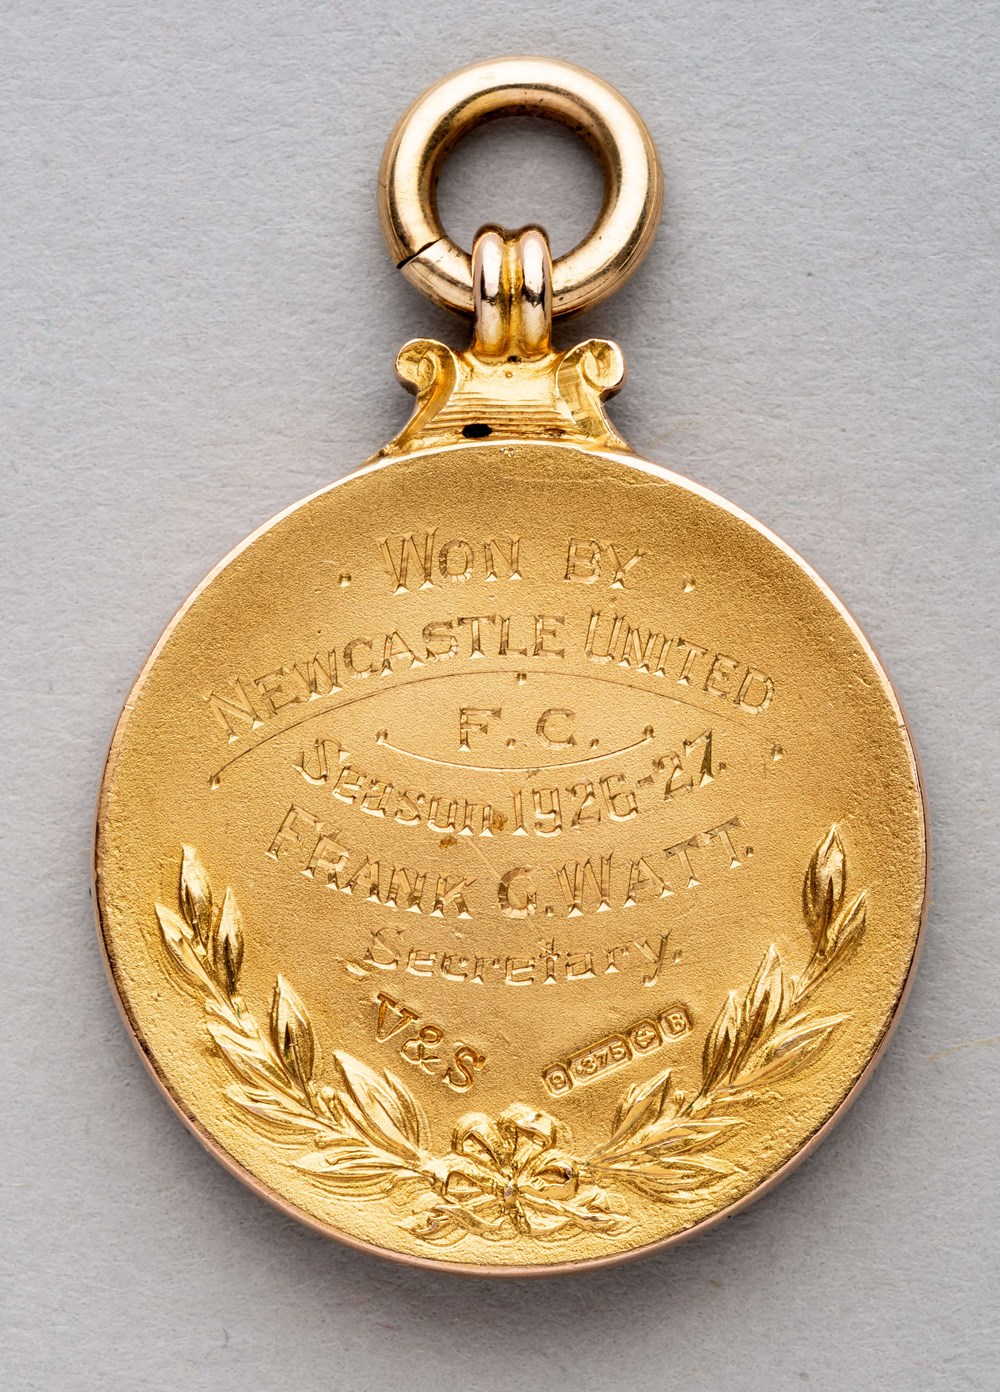 Newcastle United Football League Division One Championship medal awarded to Newcastle United's Frank Watt in season 1926-27